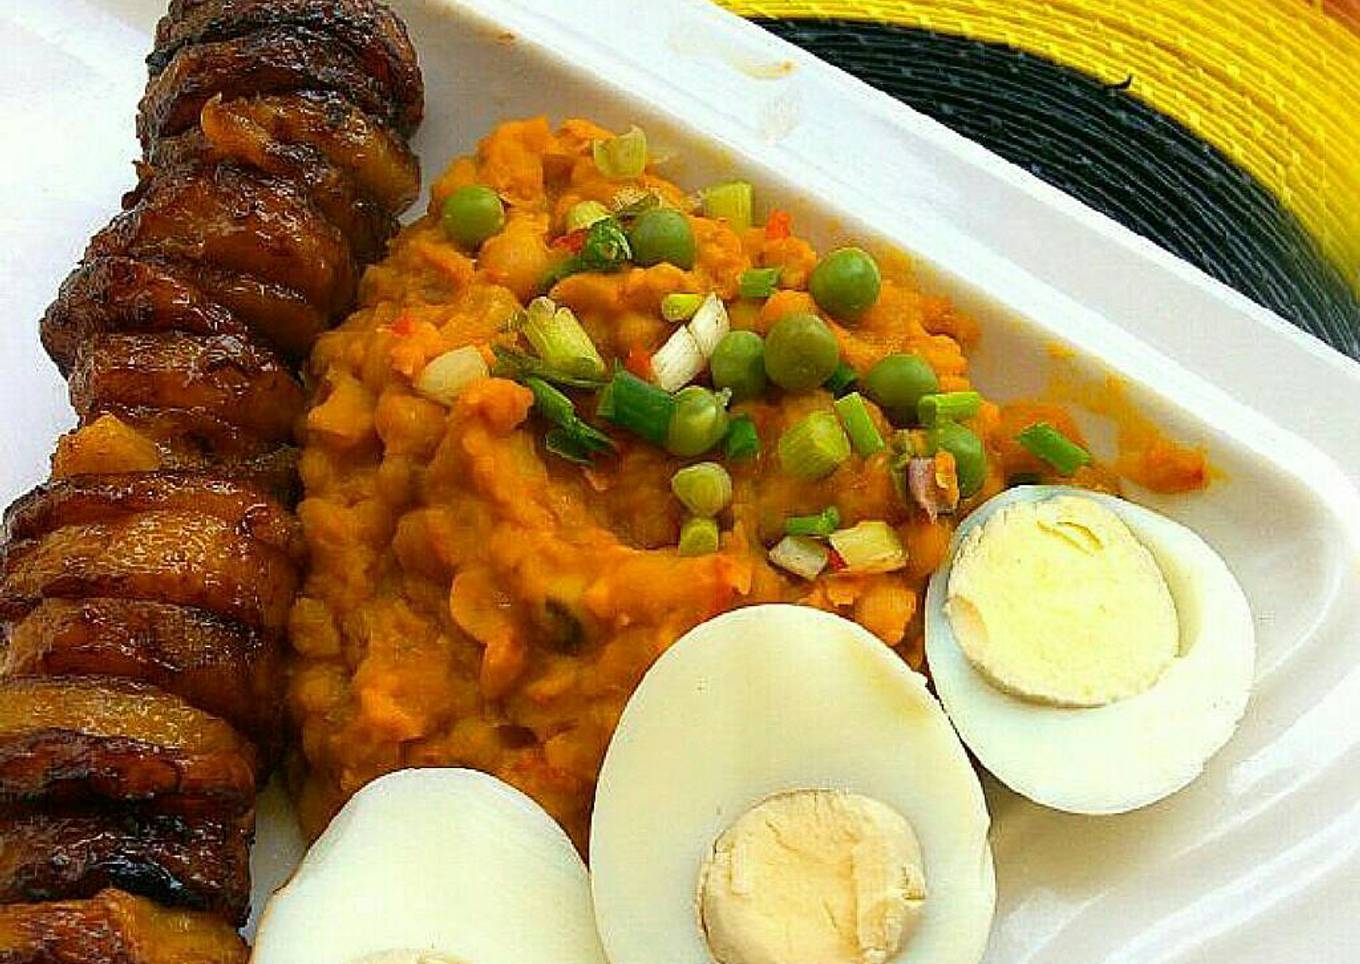 Beans paired with fried plantains and hard boiled eggs